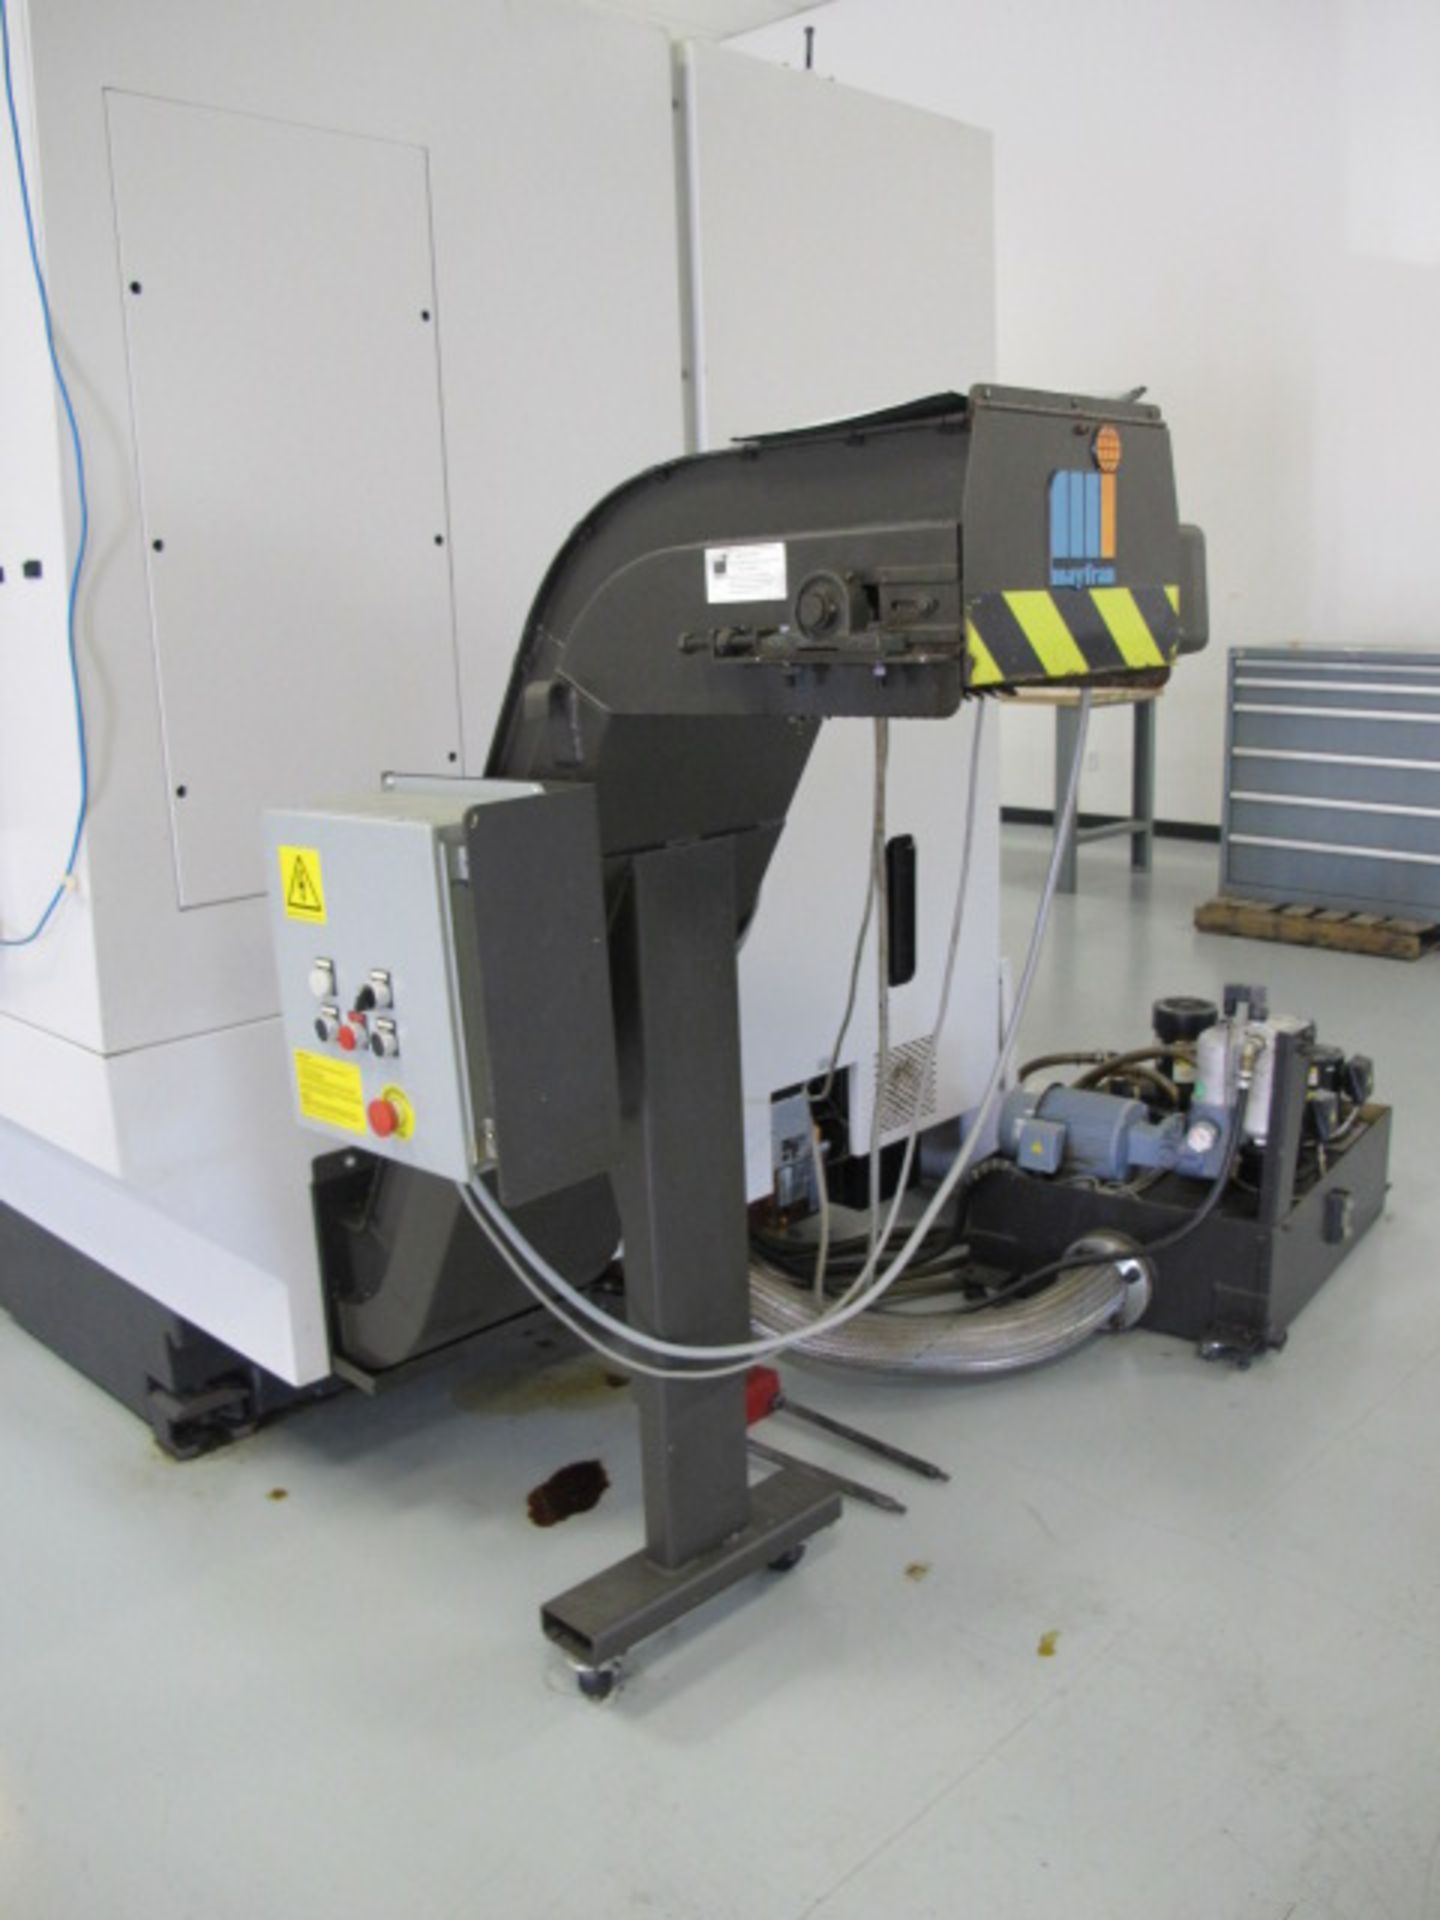 2001 Hitachi Seiki Super HiCell 250 5-Axis Twin Spindle Super Productive Integrated Machining Cell - Image 18 of 19